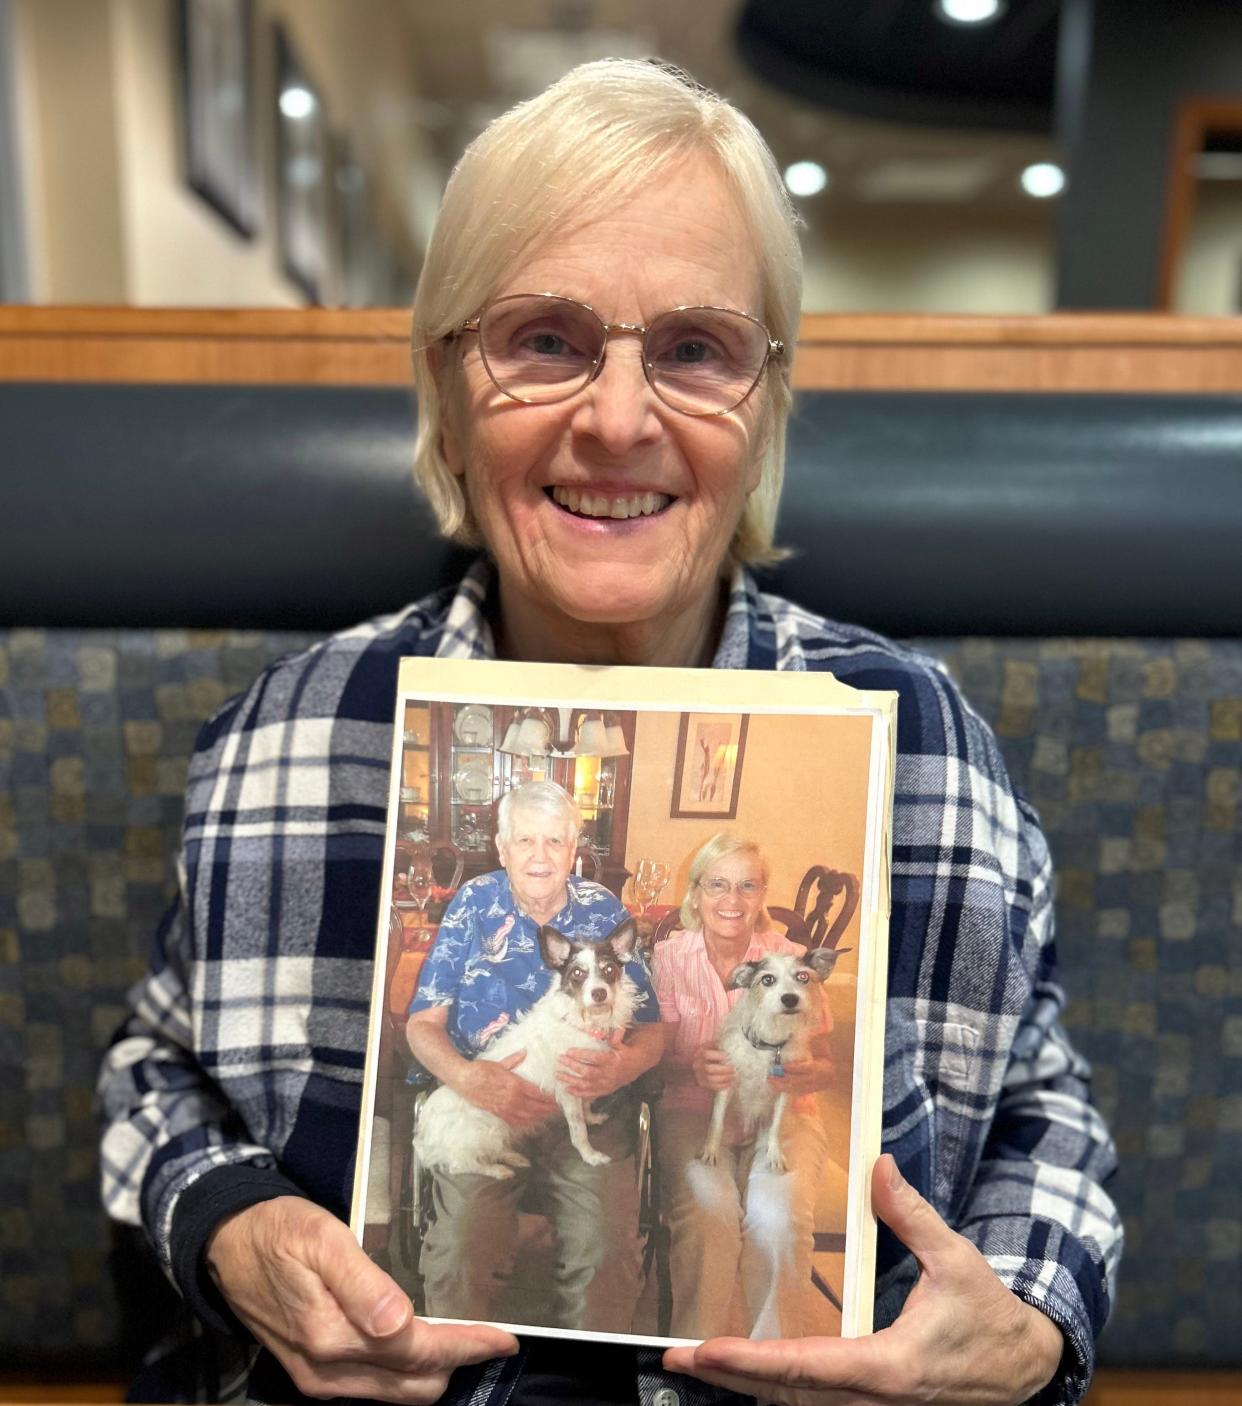 Maggie Kristjanson, a Sarasota teacher's aide, said two things got her through the immediate impact of the death of her husband, Ivan, more than three years ago: her dogs, and Season of Sharing. Shown is Maggie with an old photo of herself with her husband holding Joey, their Jack Russell Terrier. Maggie is holding Katie, who passed away before her husband and was replaced by Pixie, a Chihuahua-Jack Russell mix that she still has.